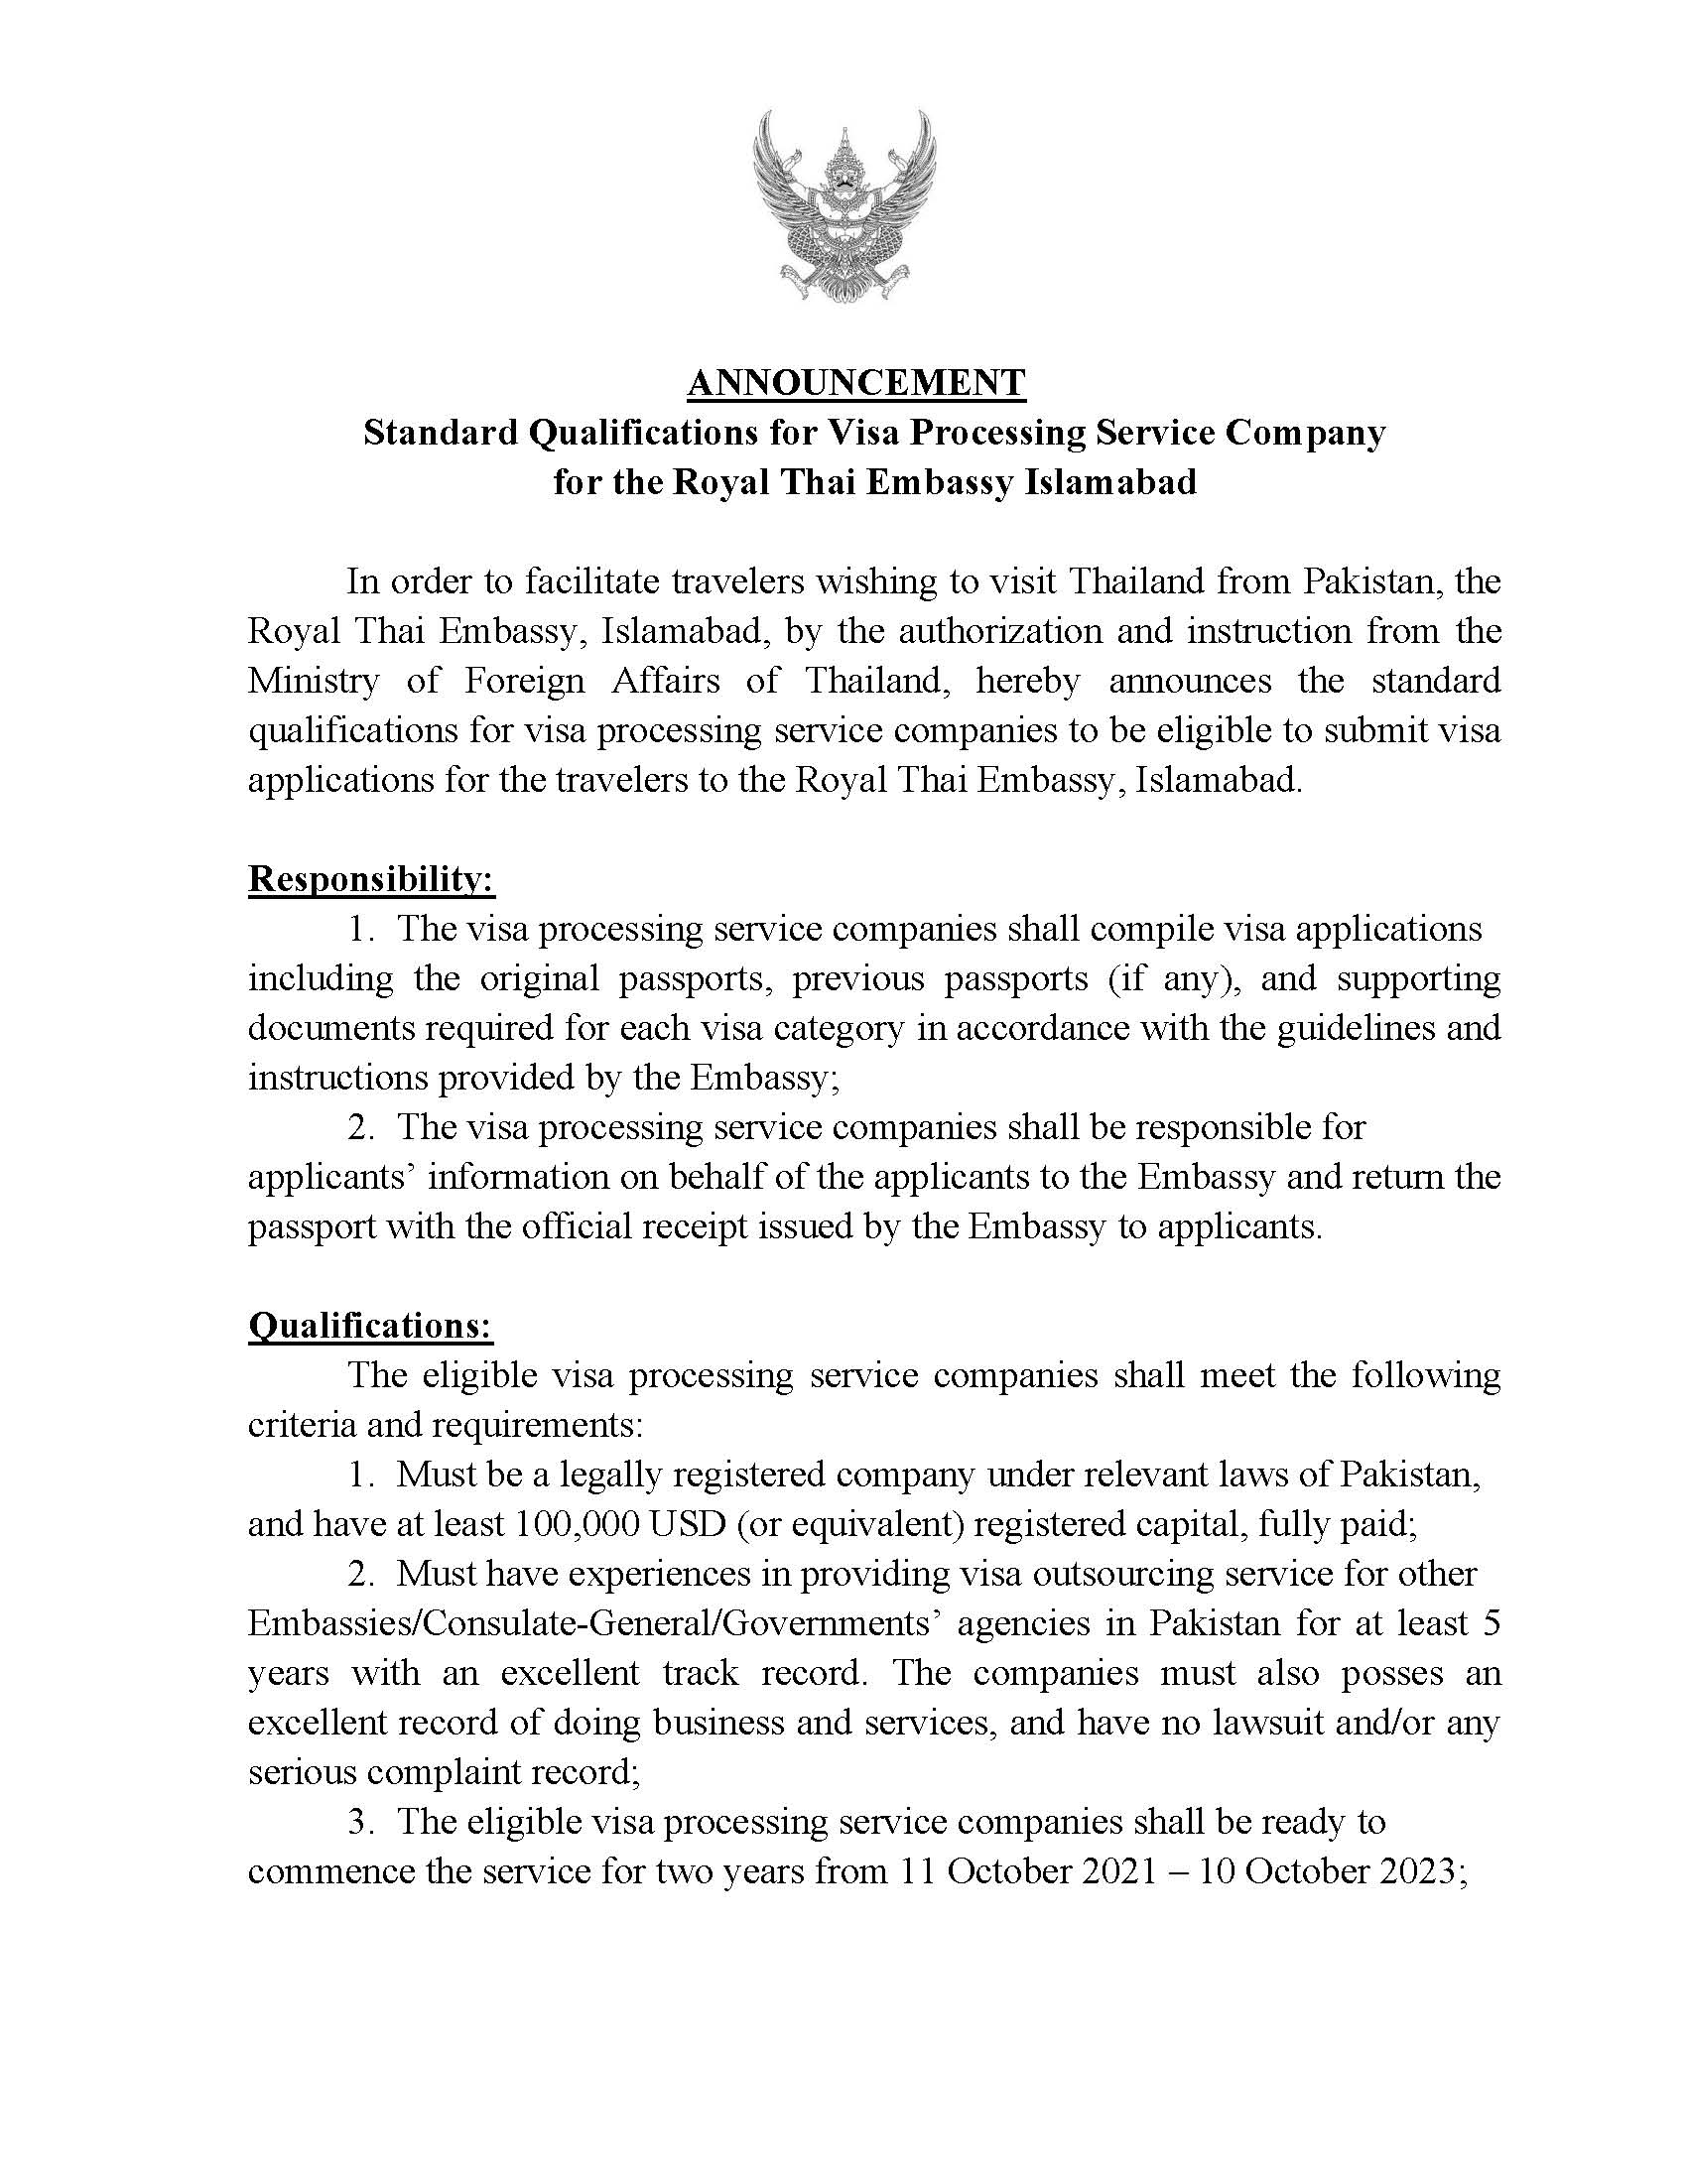 Announcement_-_Standard_Qualifications_for_Visa_Processing_Service_Company_Final_as_of_24_Sep_2021_Page_1